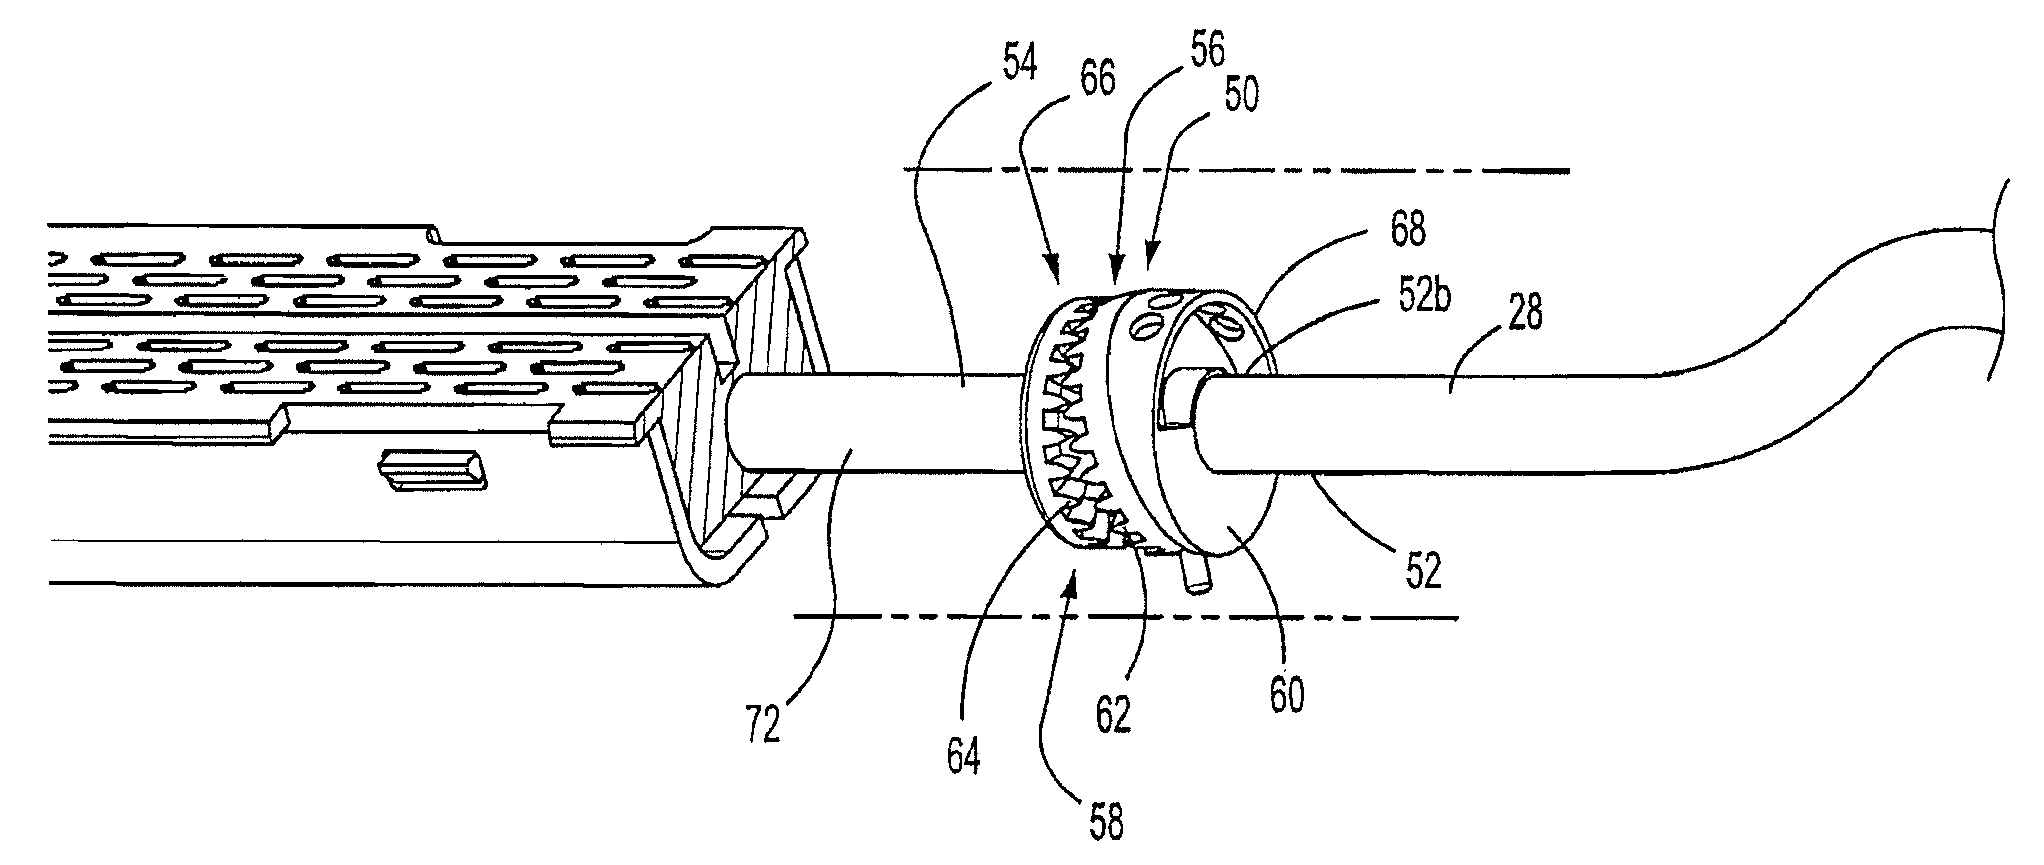 Nutating Gear Drive Mechanism for Surgical Devices